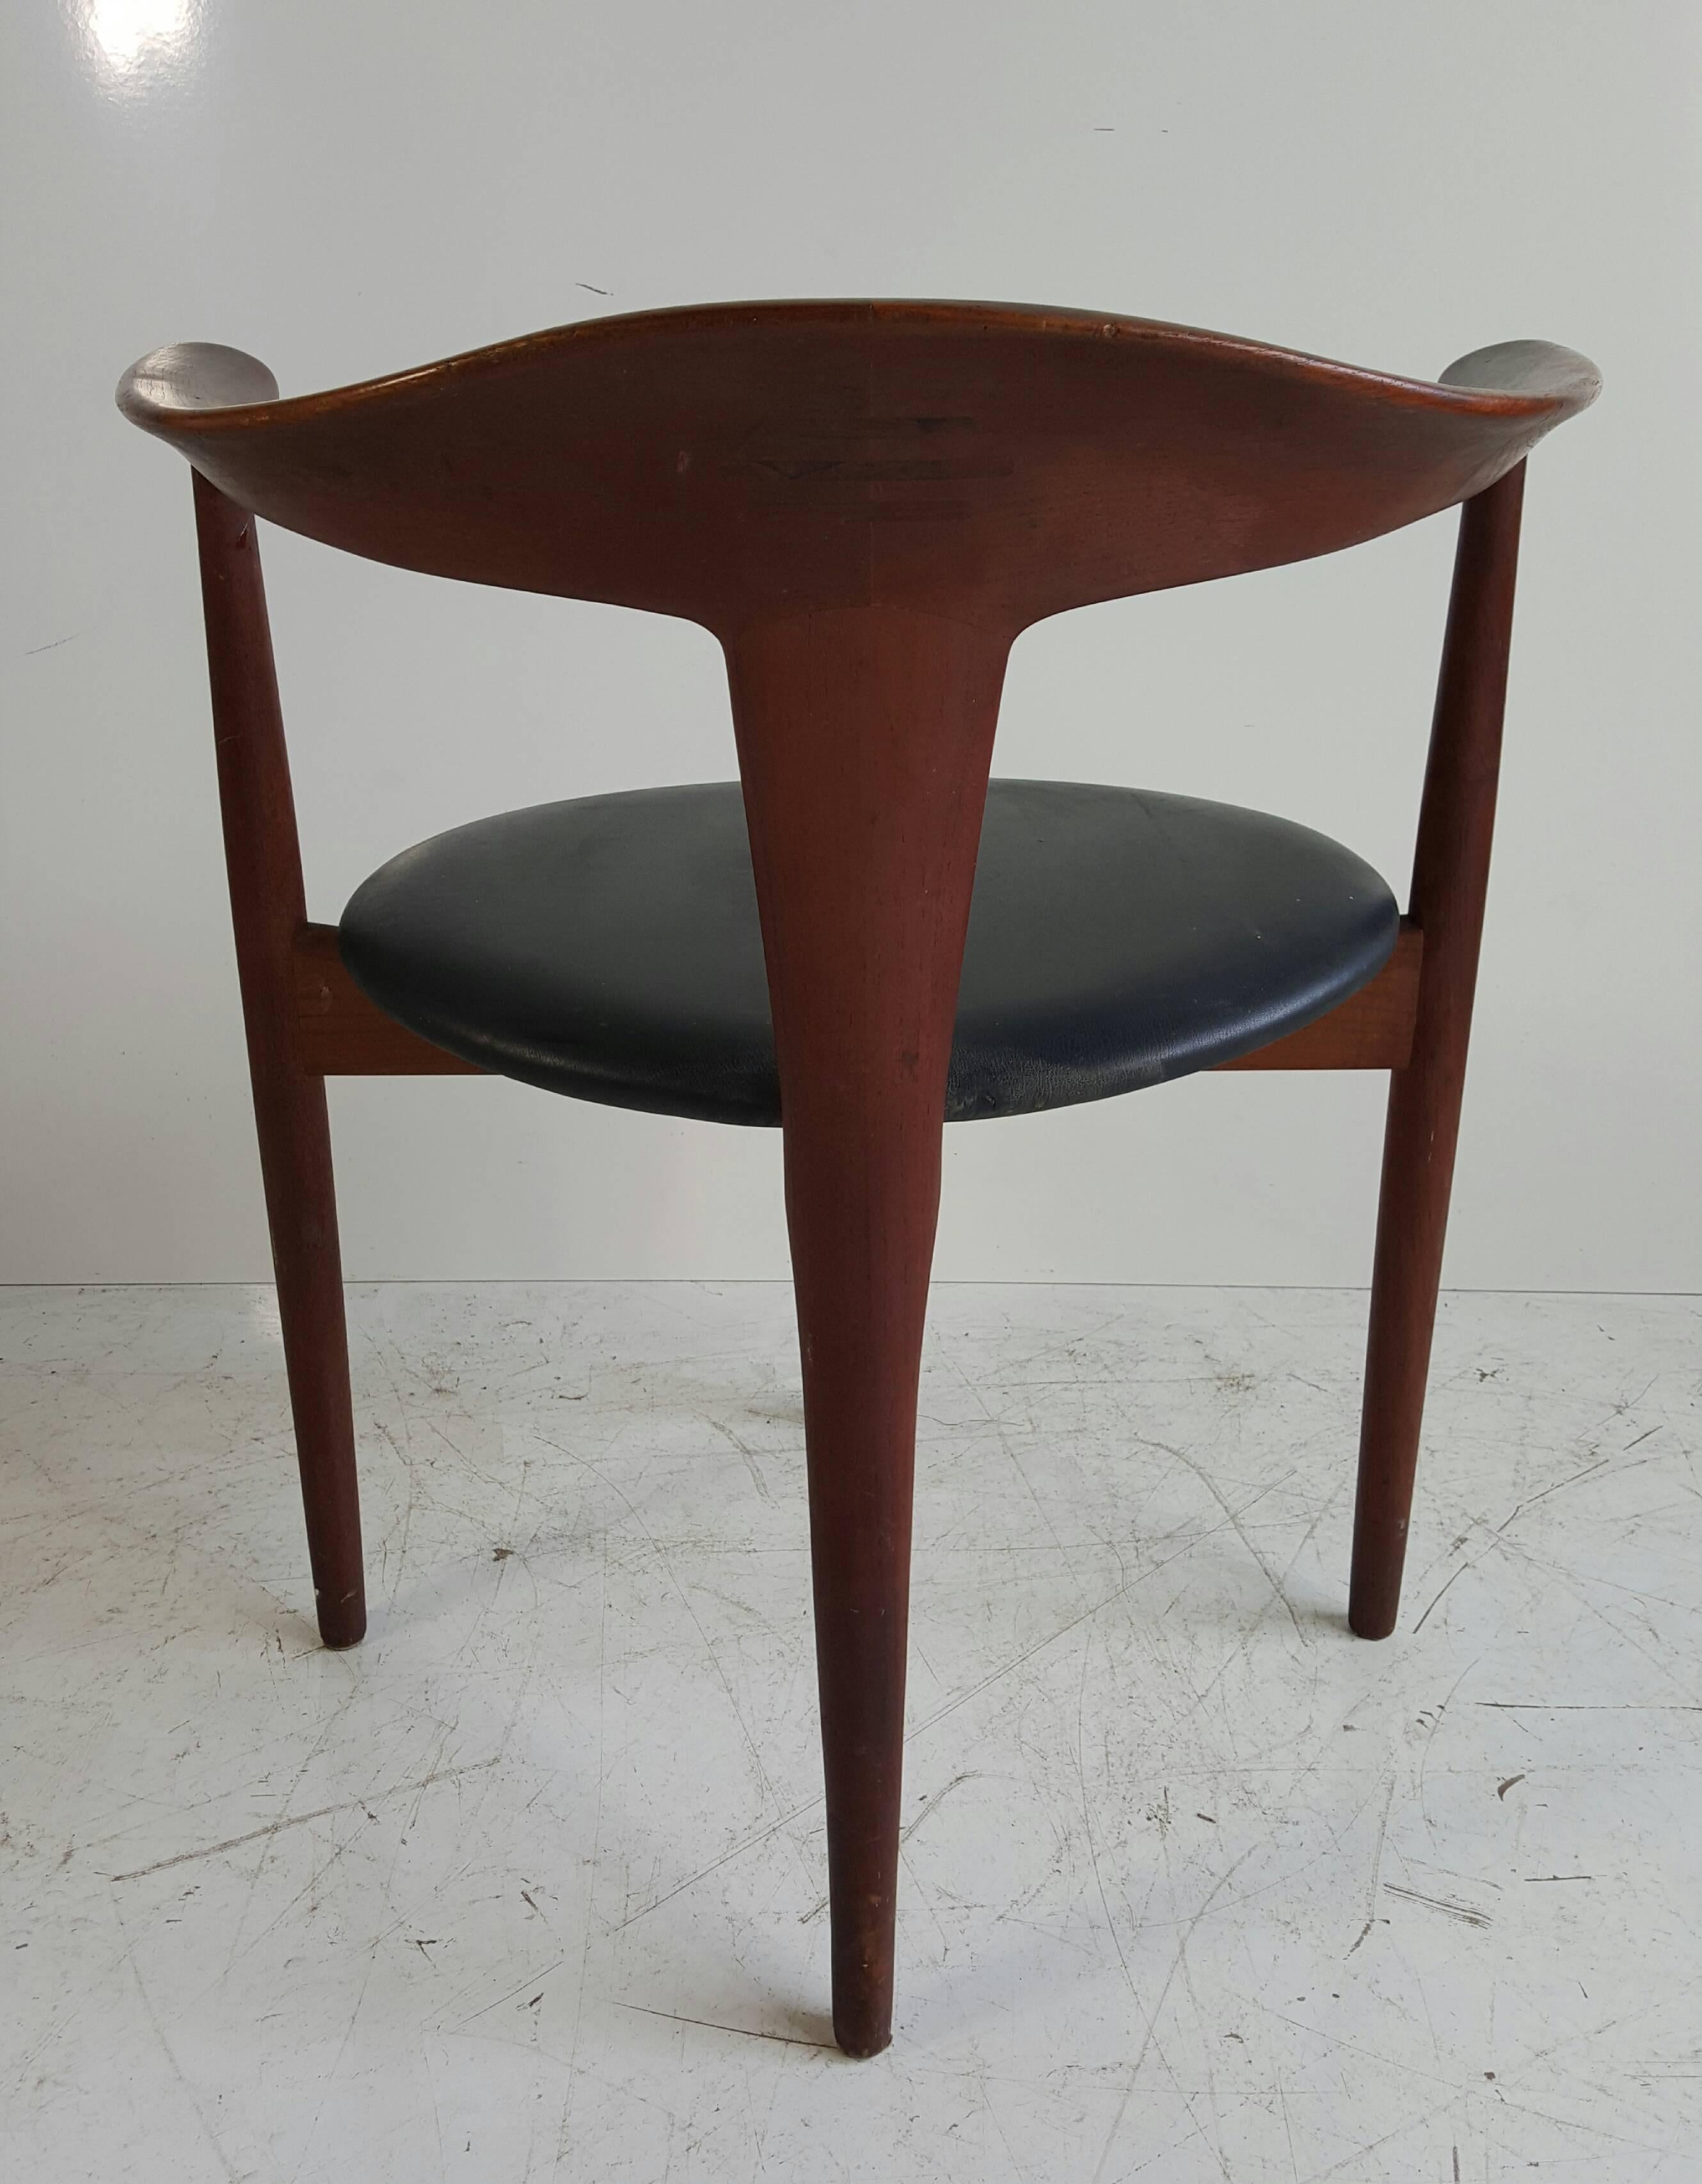 Danish Modernist Sculptural Walnut and Leather Armchair by Johannes Andersen